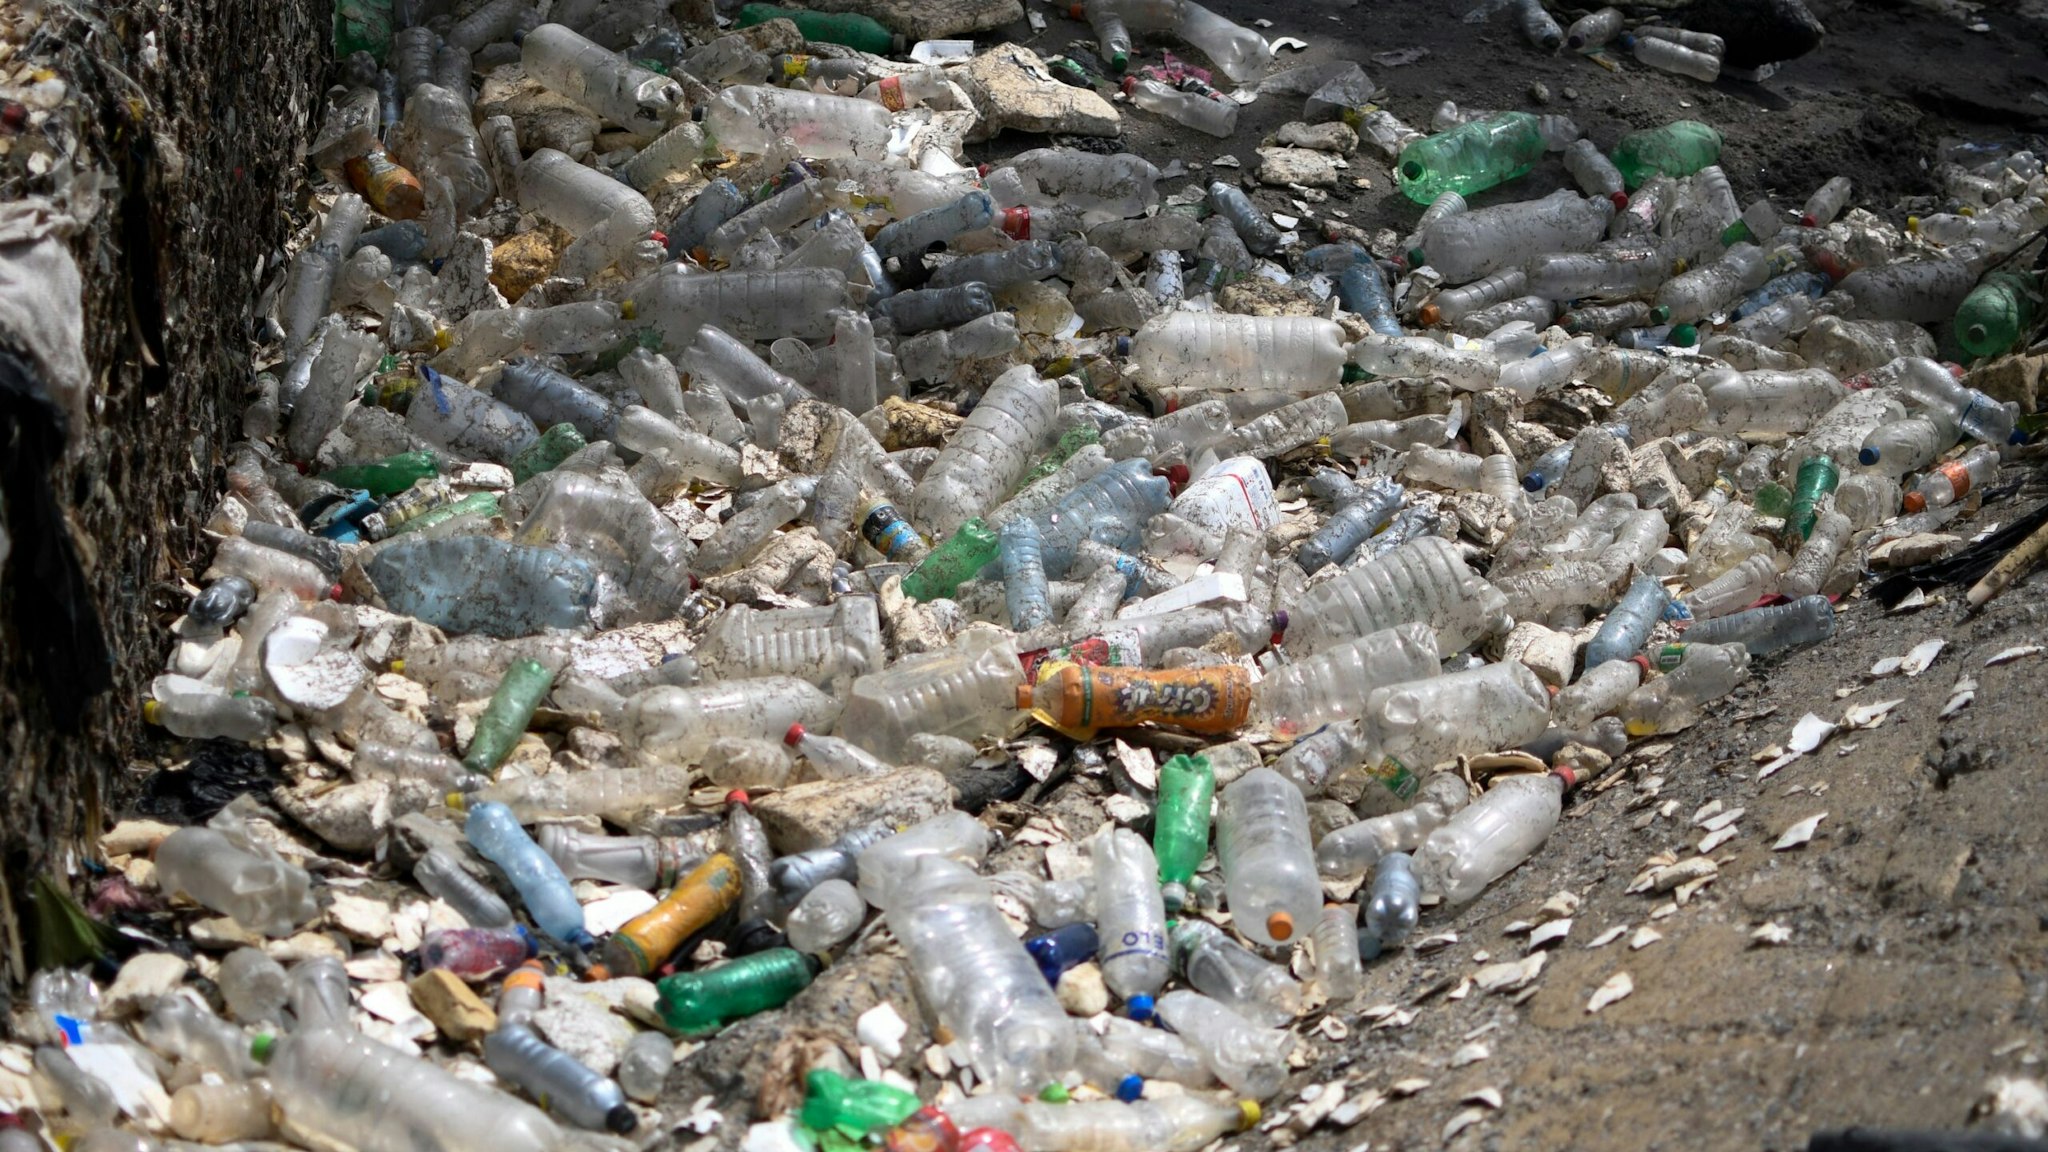 Plastics that work their way into lakes, rivers and oceans break down into Microparticles that then enter the food chain